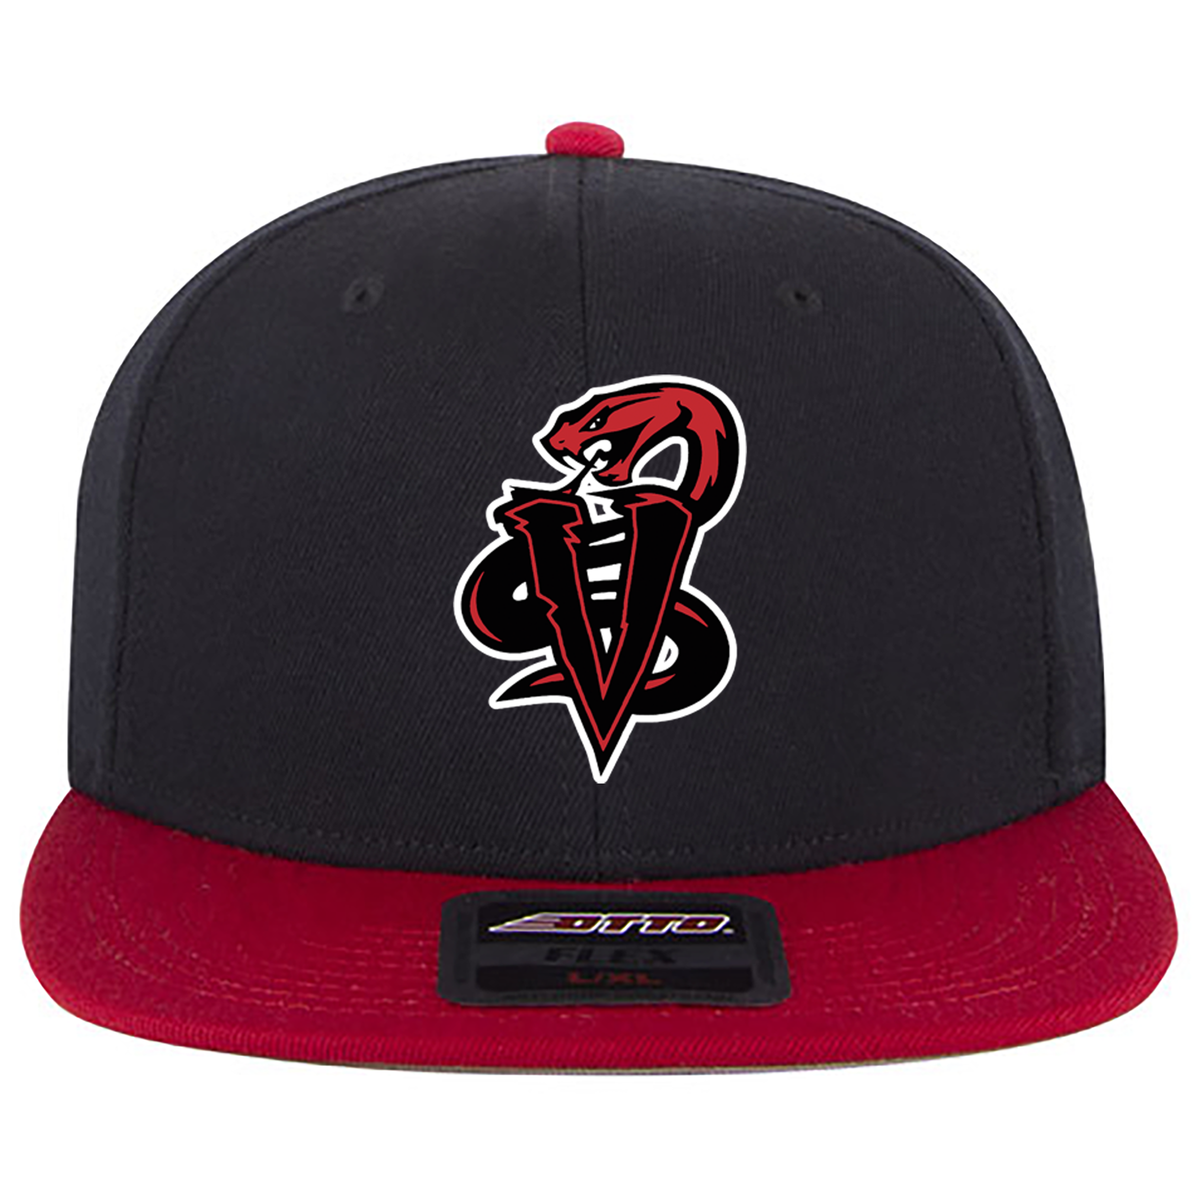 East Kentucky Vipers Flex Fit 6 Panel Mid Profile Style Baseball Cap